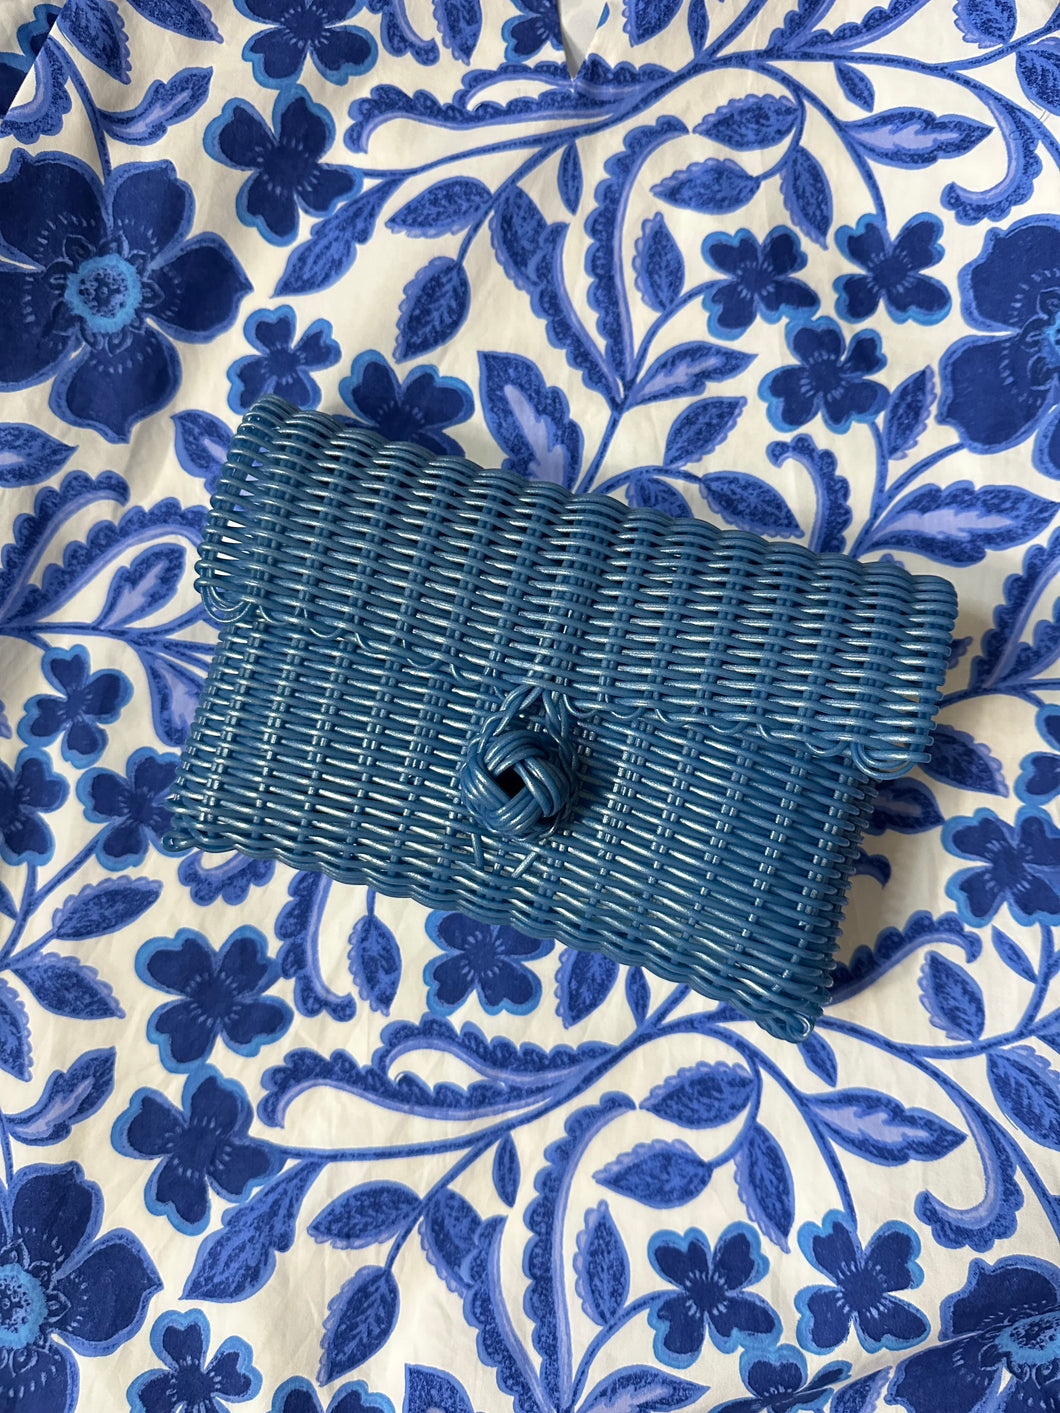 Blue woven clutch with front knot closure. Woven plastic, perfect for spring and summer.